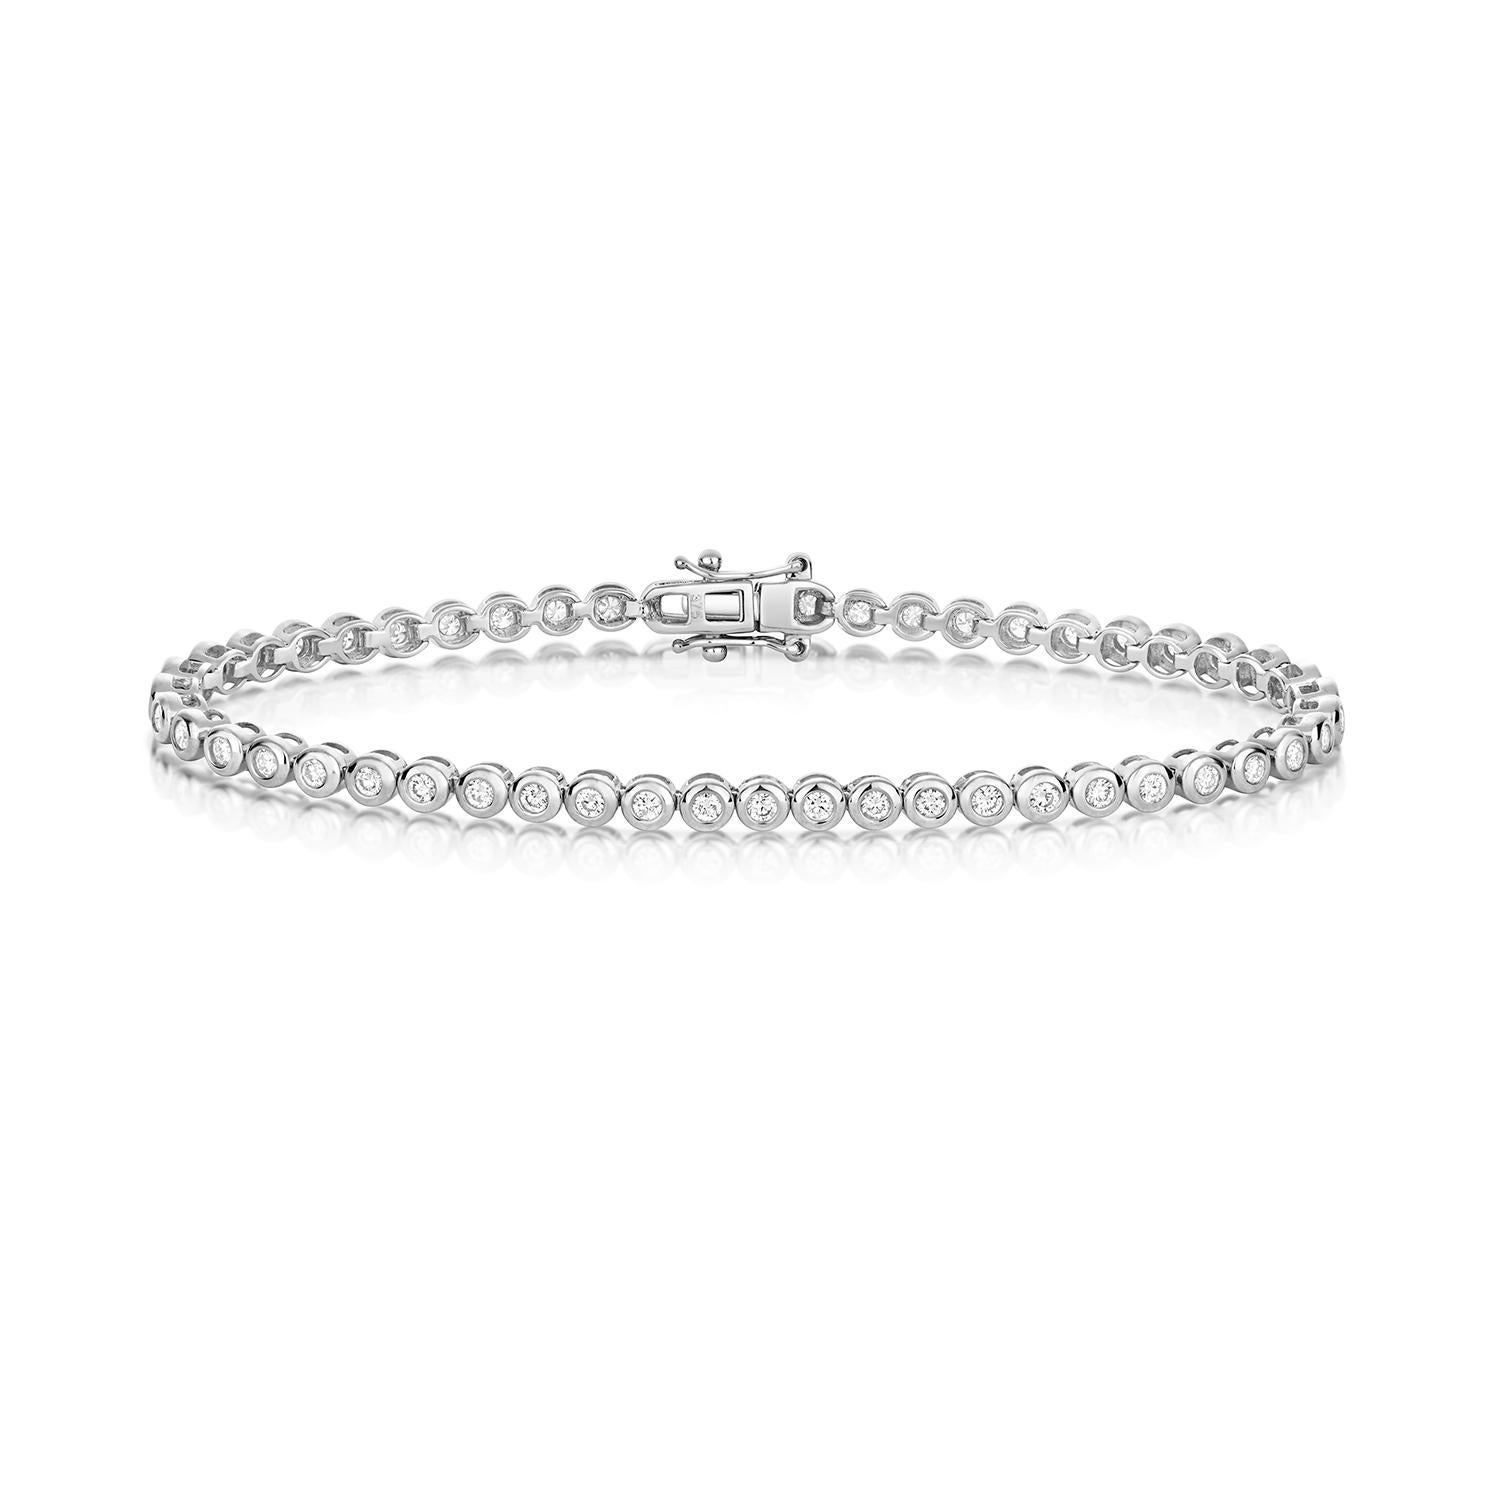 DIAMOND BRACELET

9CT W/G HI I1 1.50CT

Weight: 9.5g

Please add your desired size in message when placing your order. If you do not see your size listed here, please contact us. We can make rings on order.
Packaging:
Part of our sustainability